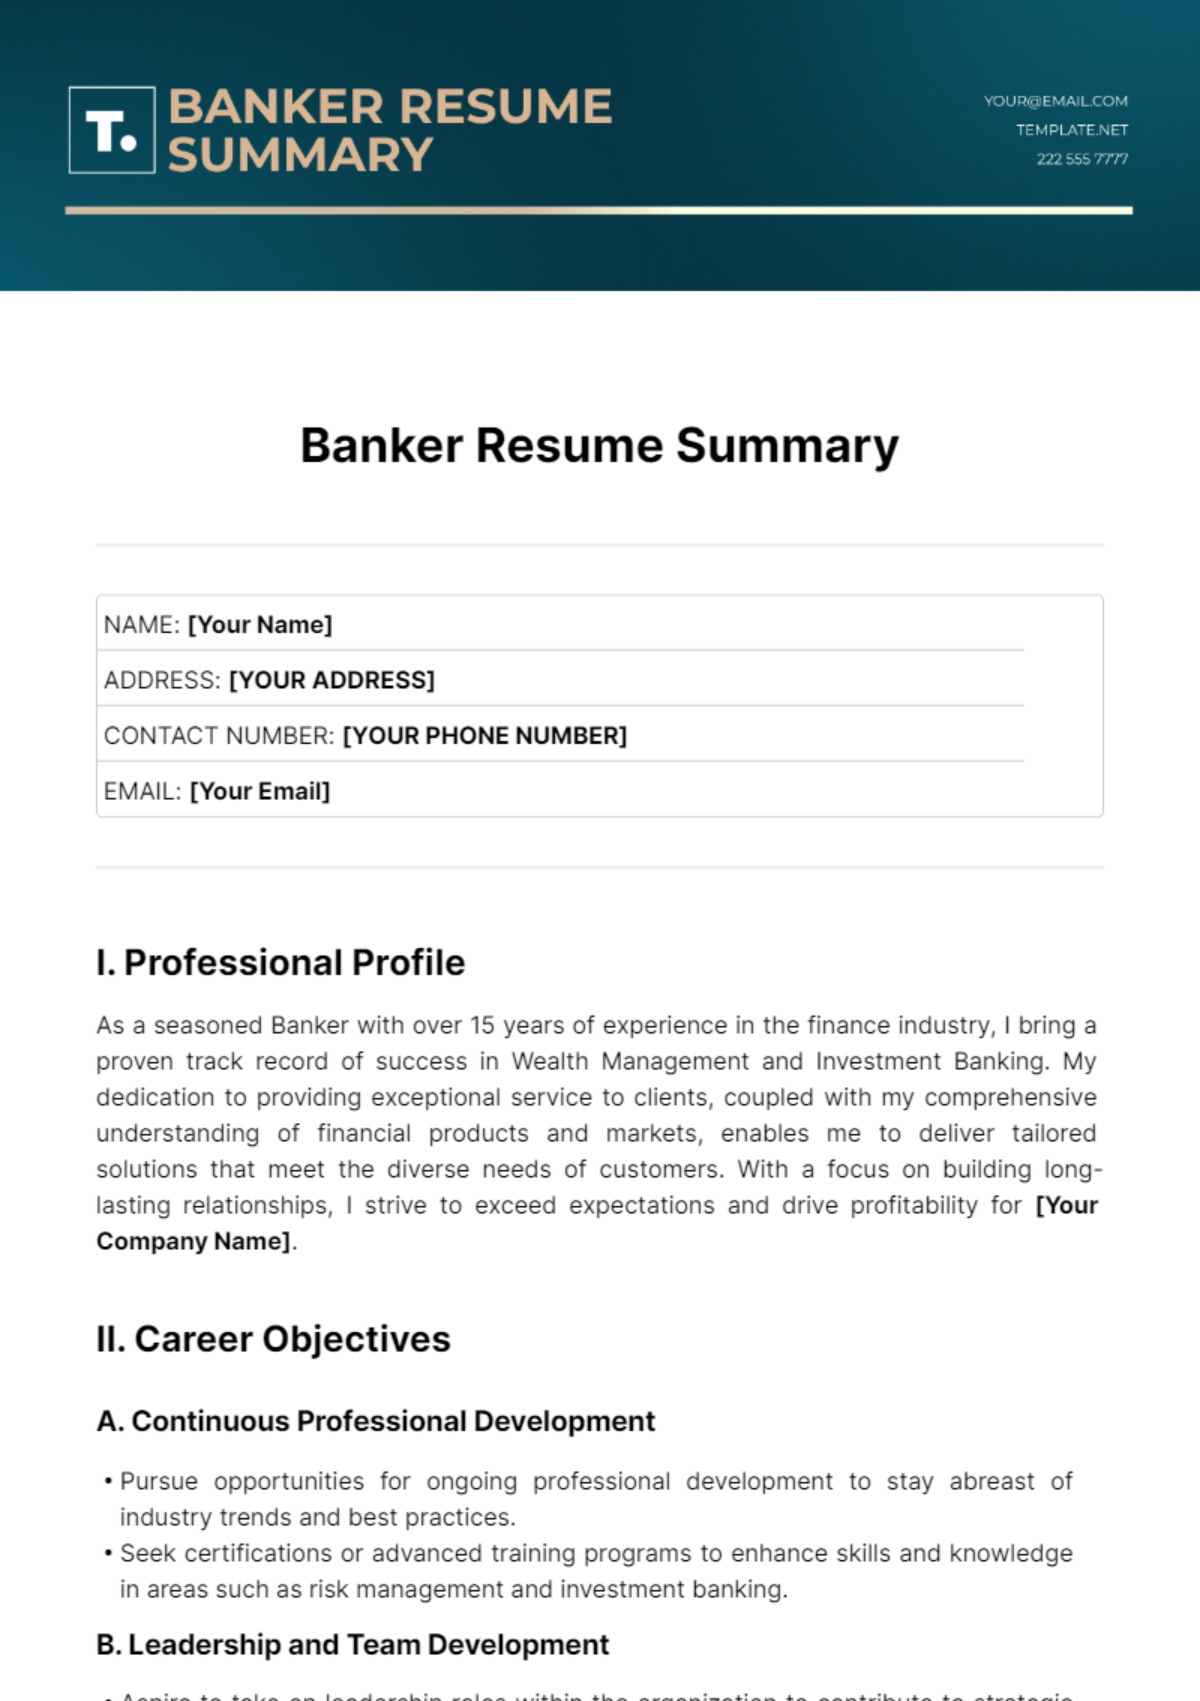 Banker Resume Summary Template